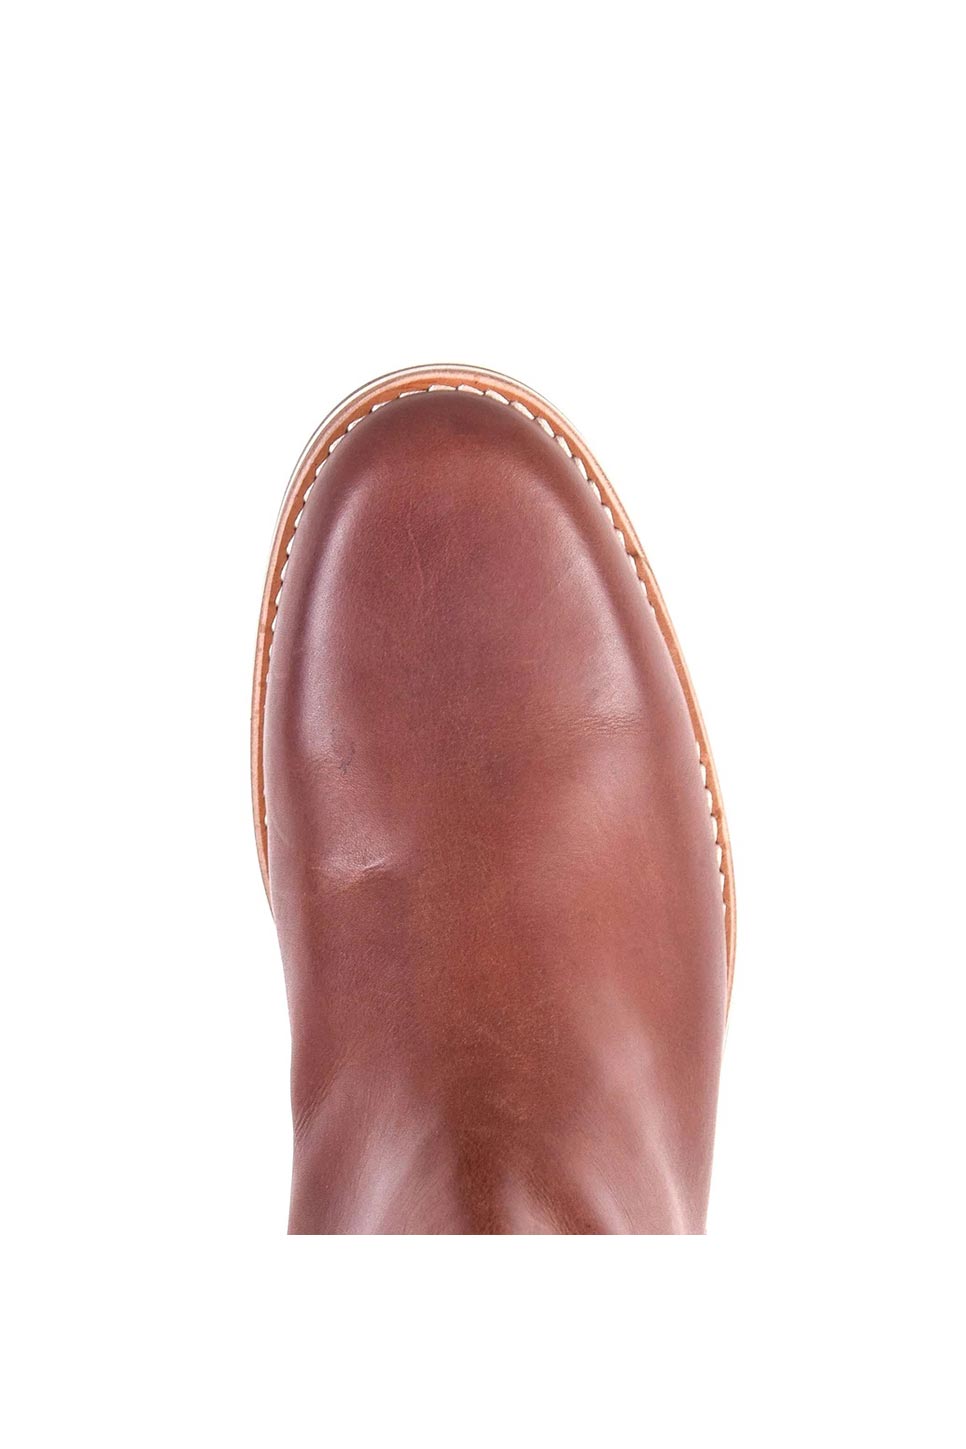 Helm Boots - The Pablo - Brown - Toe